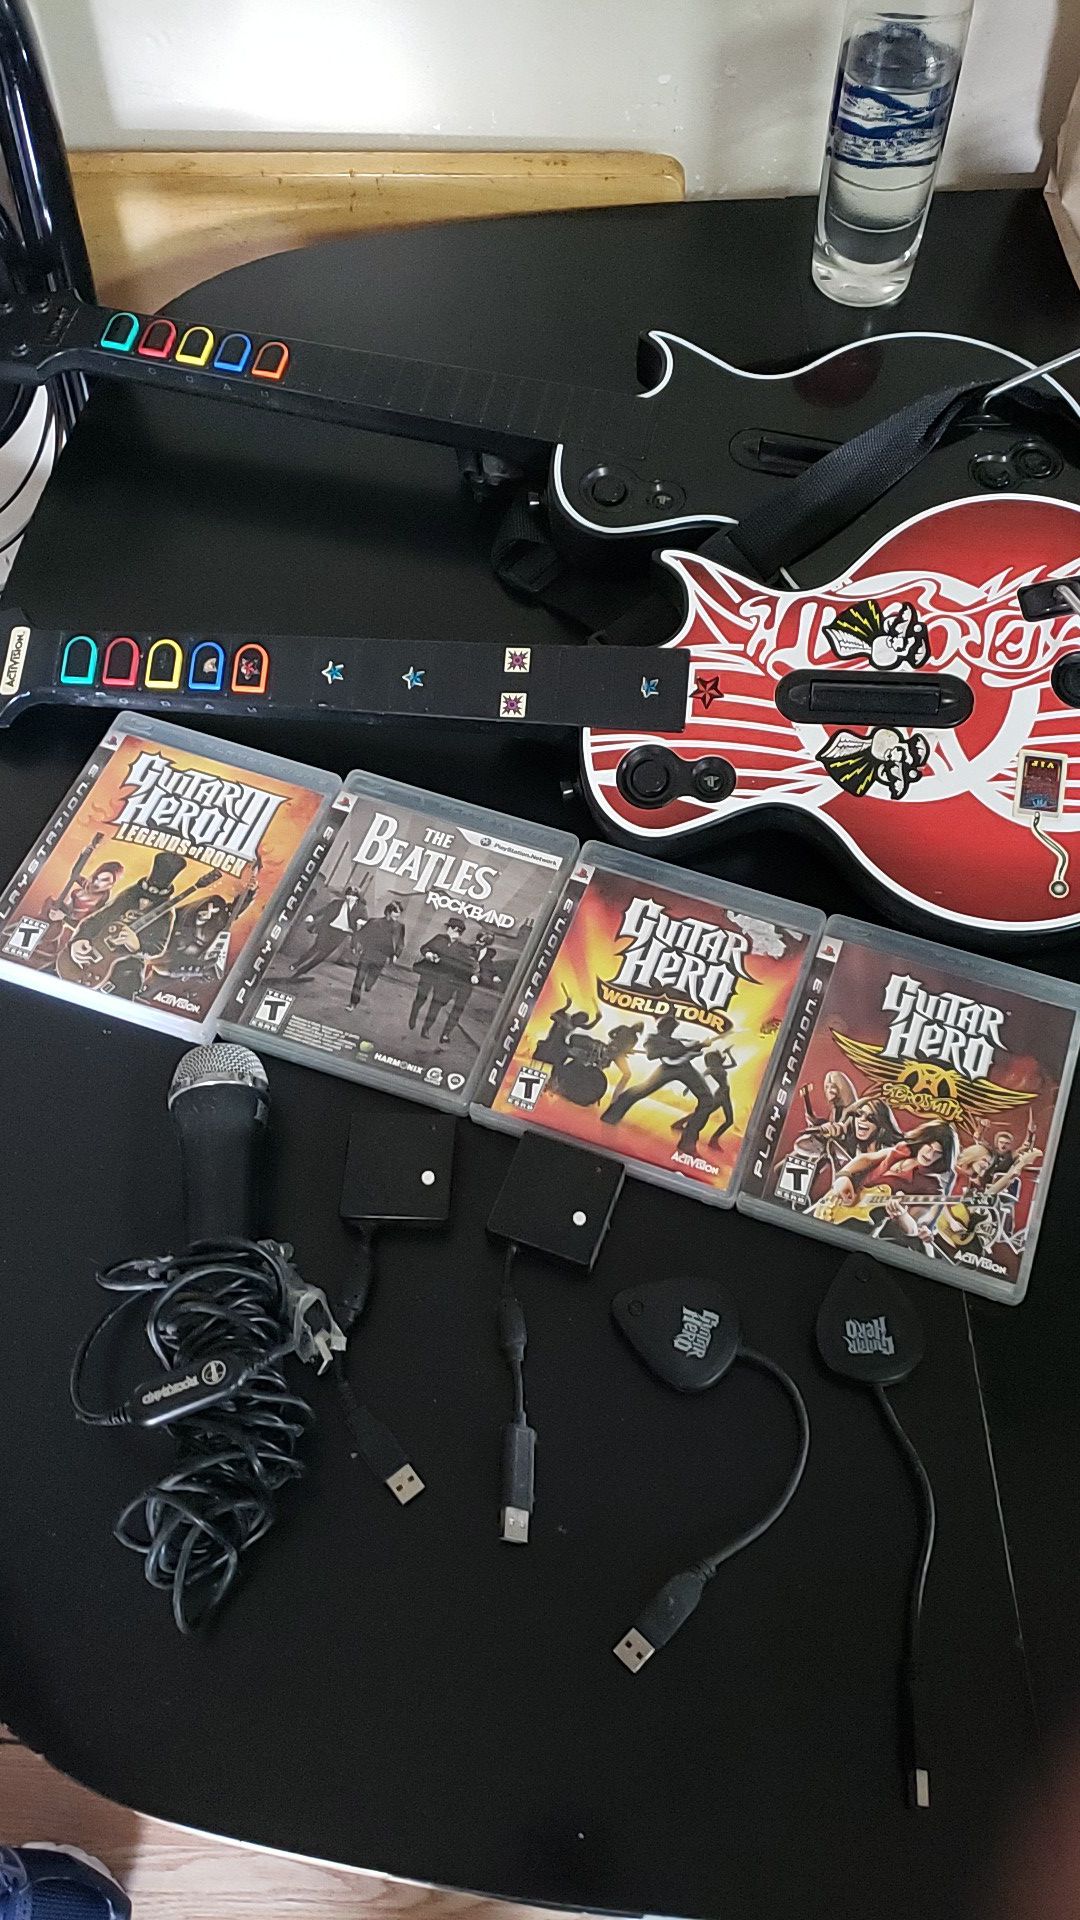 Ps3 Guitar hero everything works..2 guitars 1 mic all hardware and 4 games..